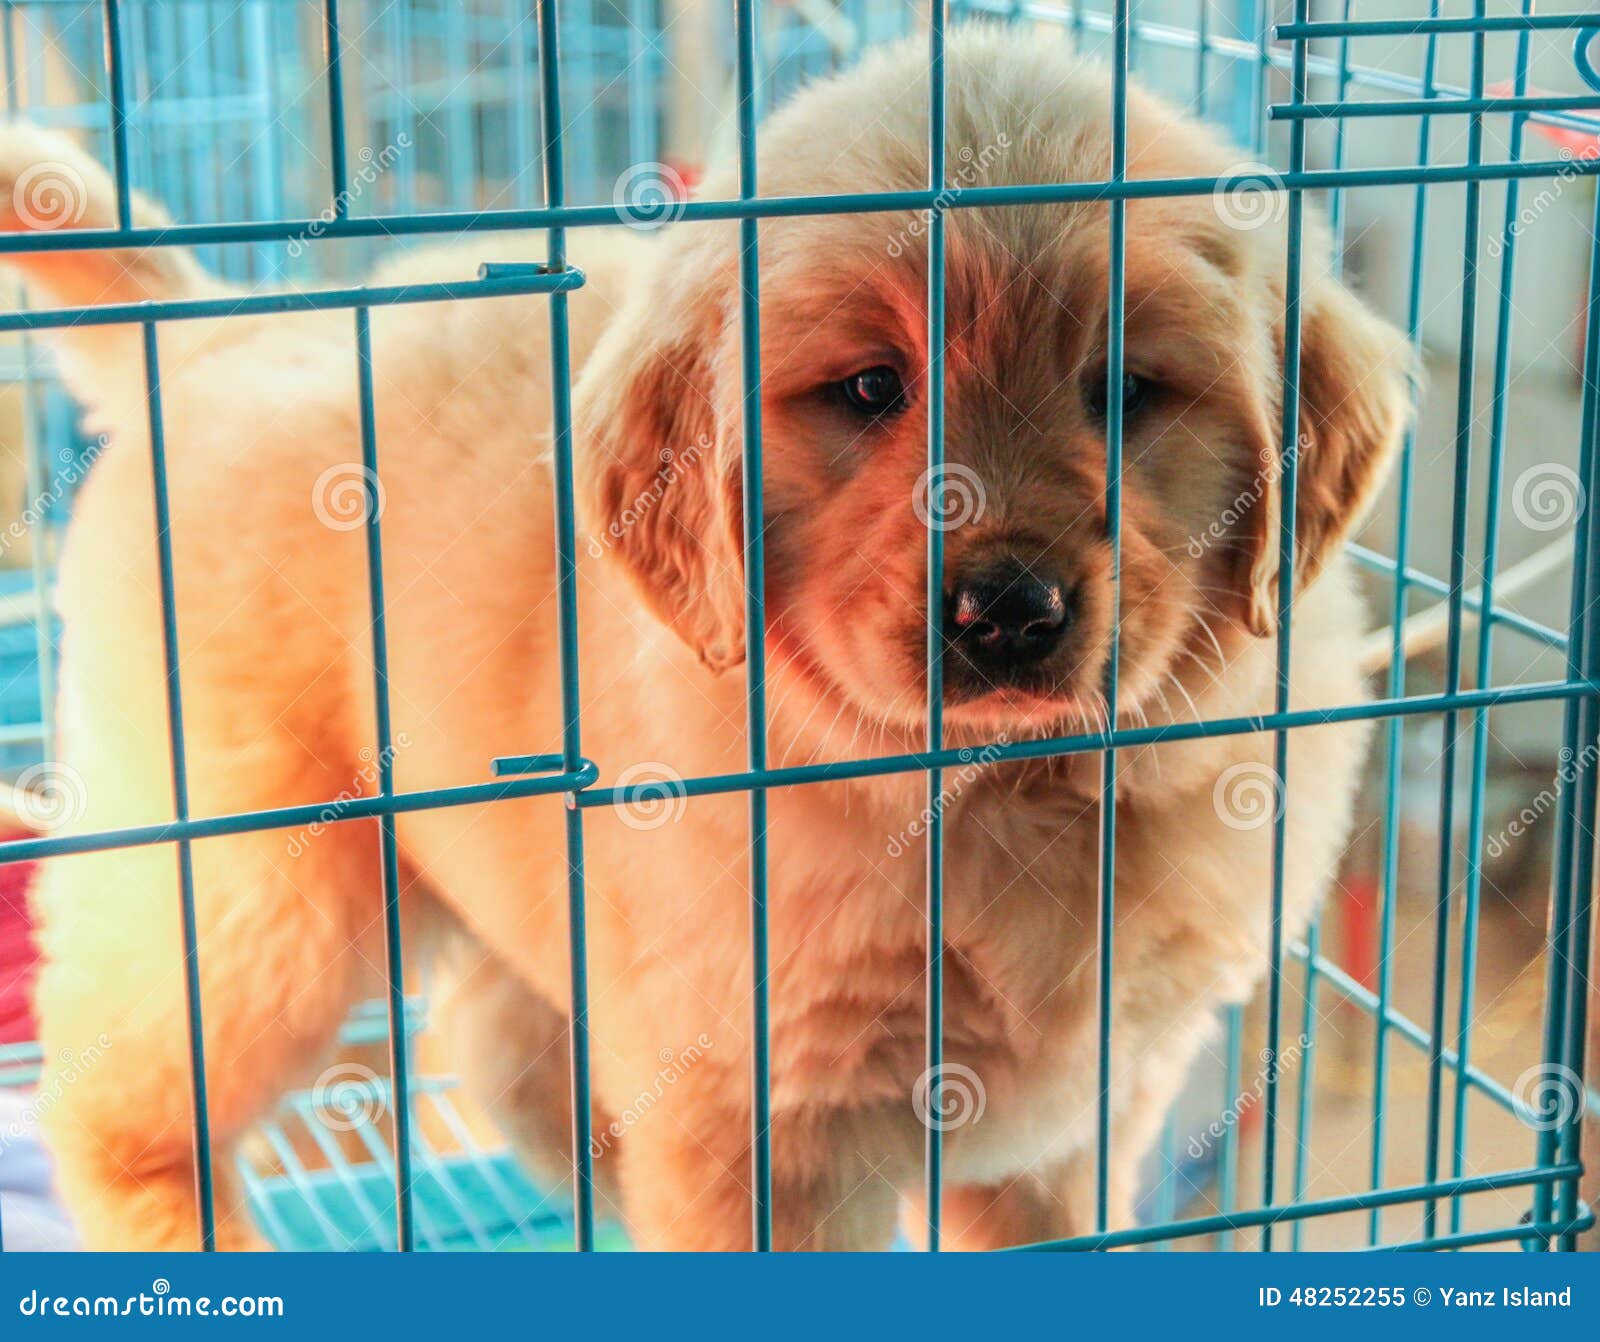 Puppy in the dog pound stock image 